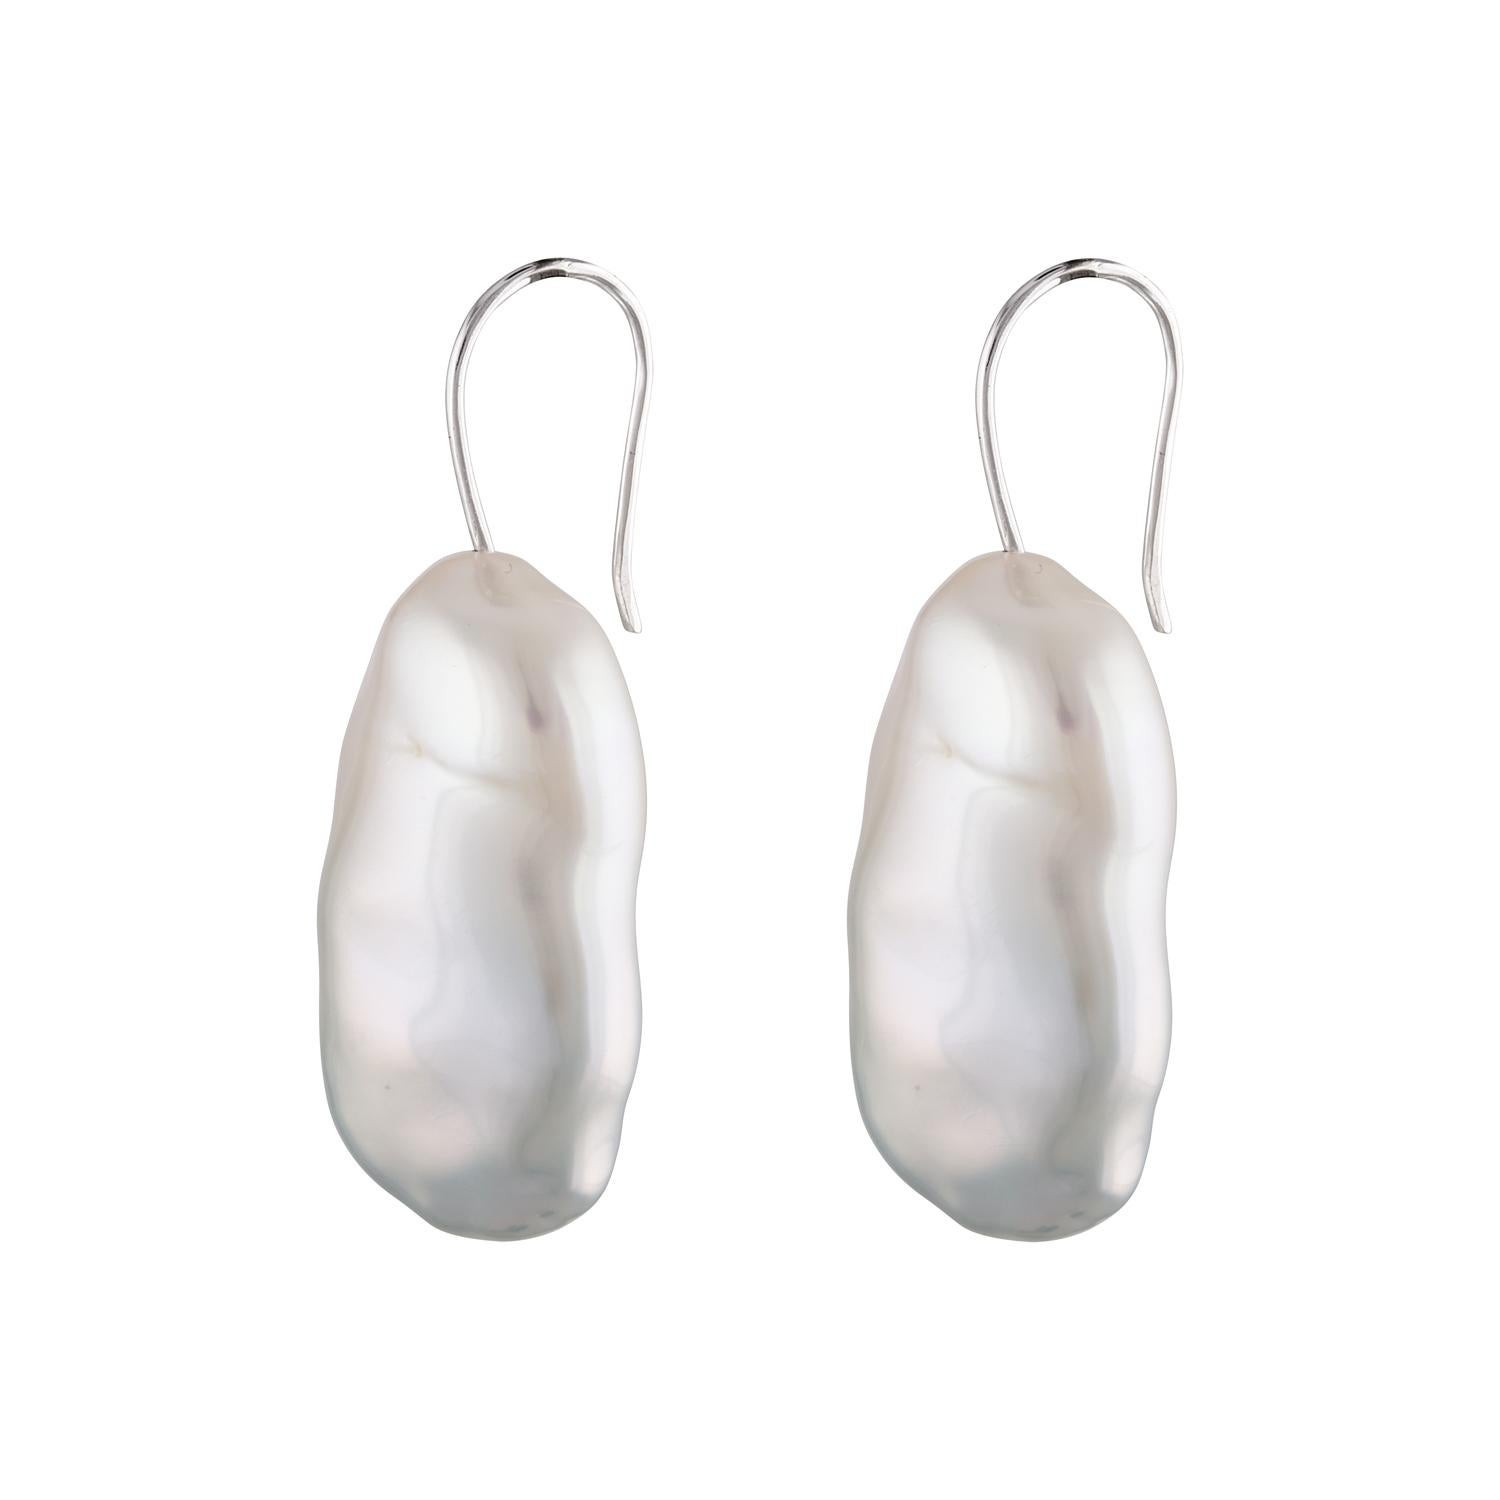 Simple, yet elegant, these Chinese Freshwater white Baroque cultured pearl earrings measure 15.6x29mm and are set on 14K white gold ear wires. 

The pearls are very well matched with great luster and elegant organic shapes. 

Perfect for weddings,